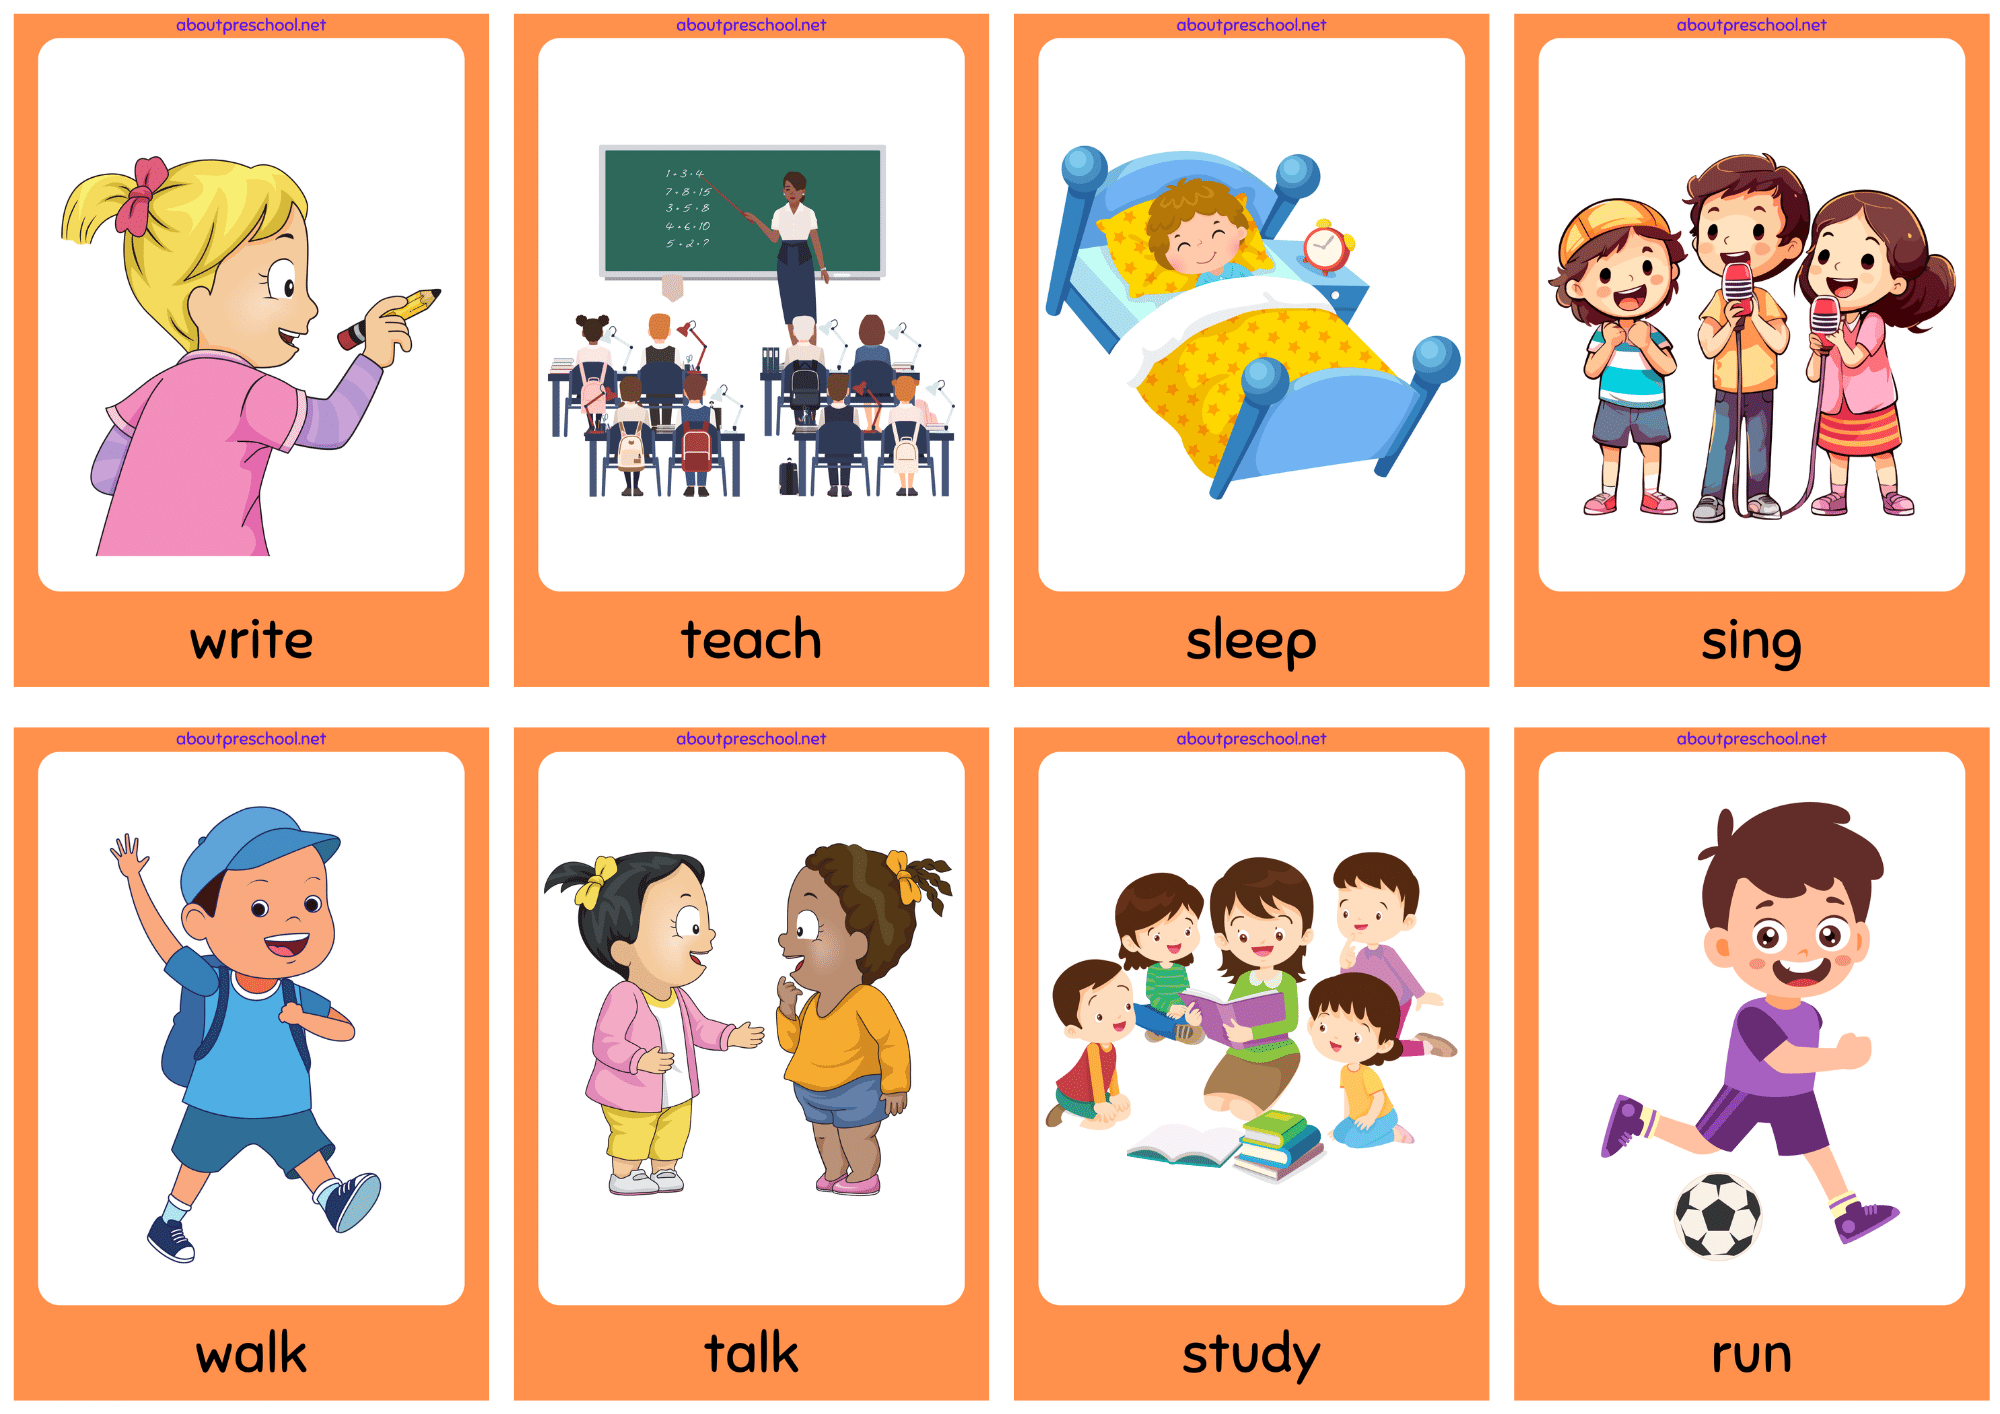 Action Verb Archives - About Preschool